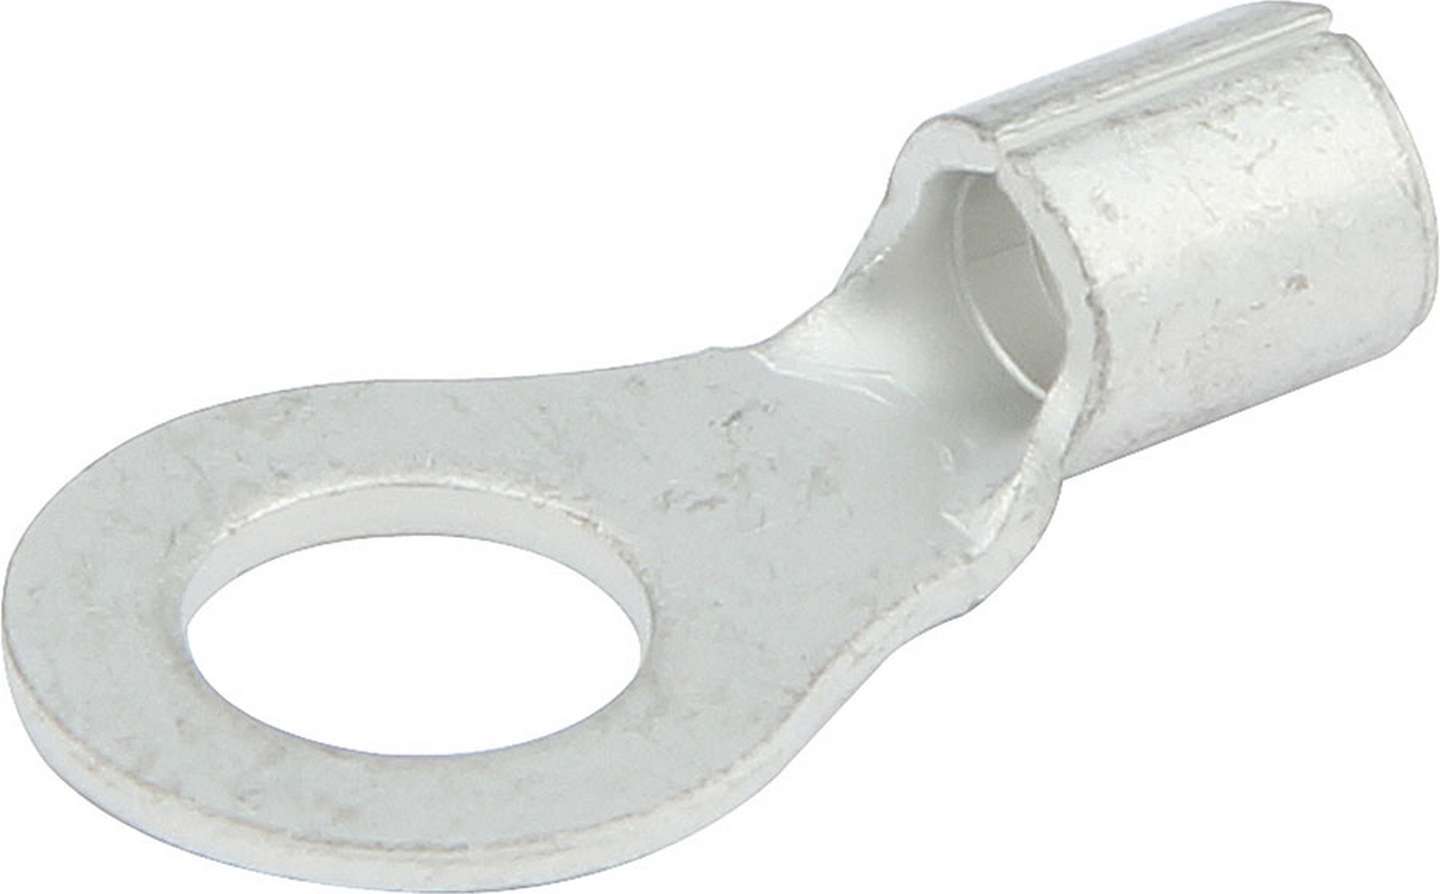 Ring Terminal 1/4in Hole Non-Insulated 12-10 20pk